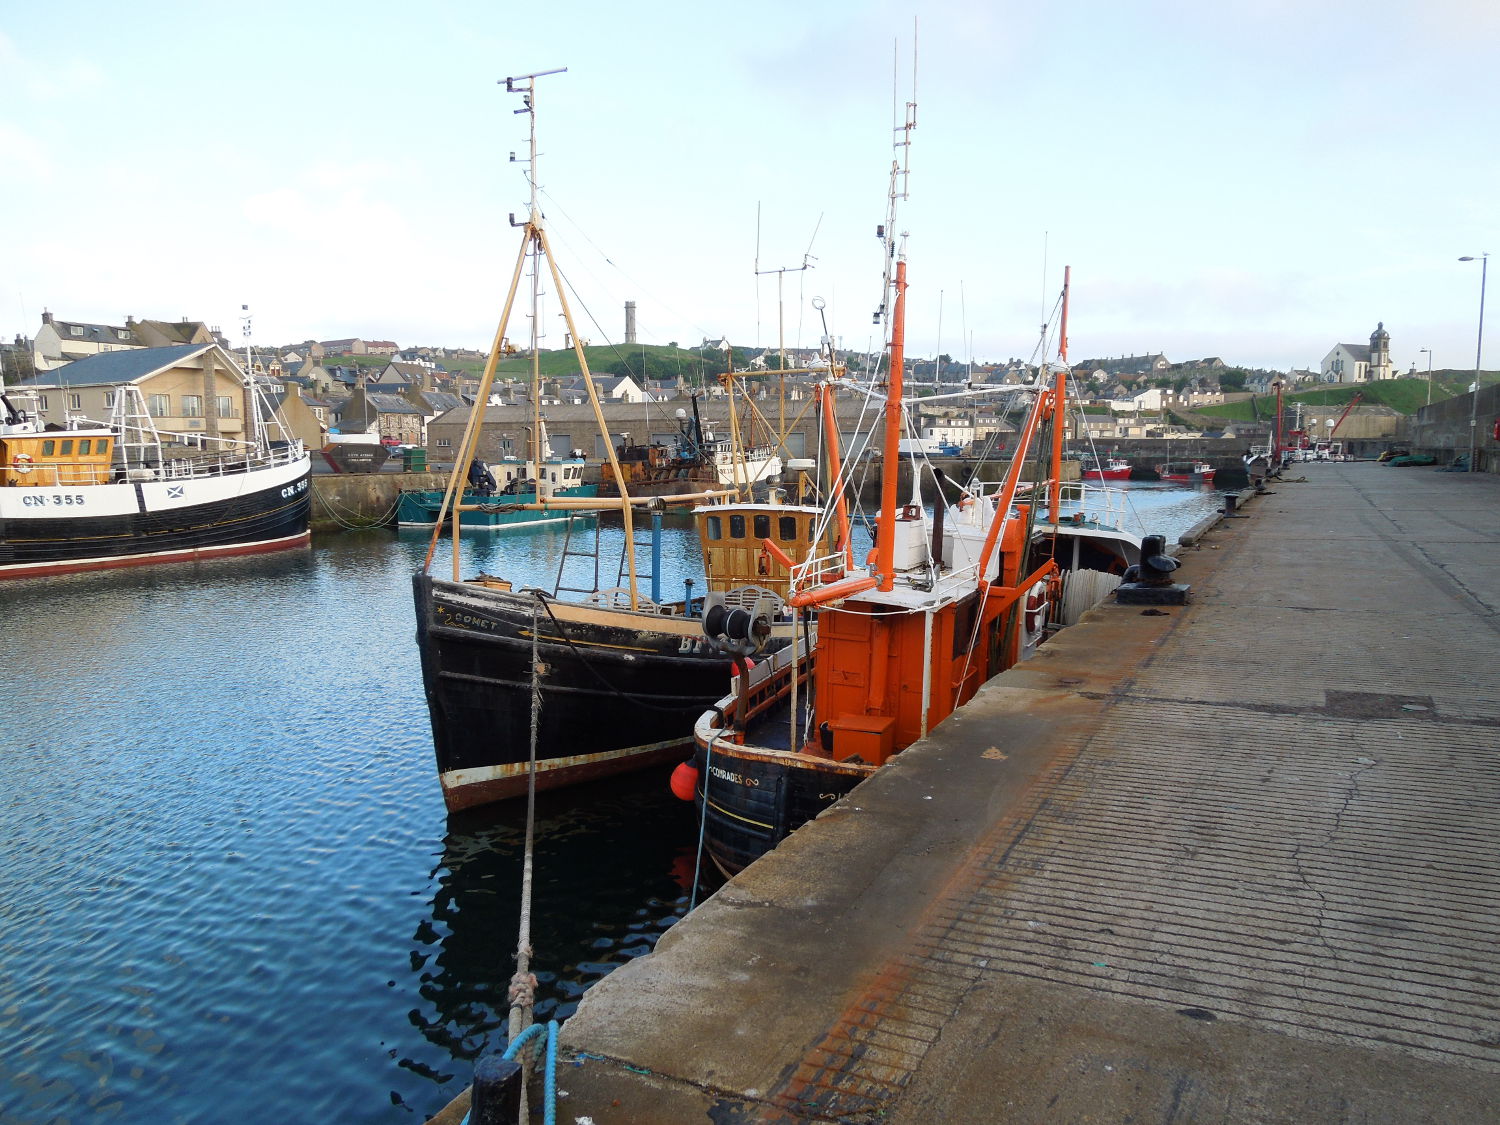 photograph of boats in Macduff Harbour